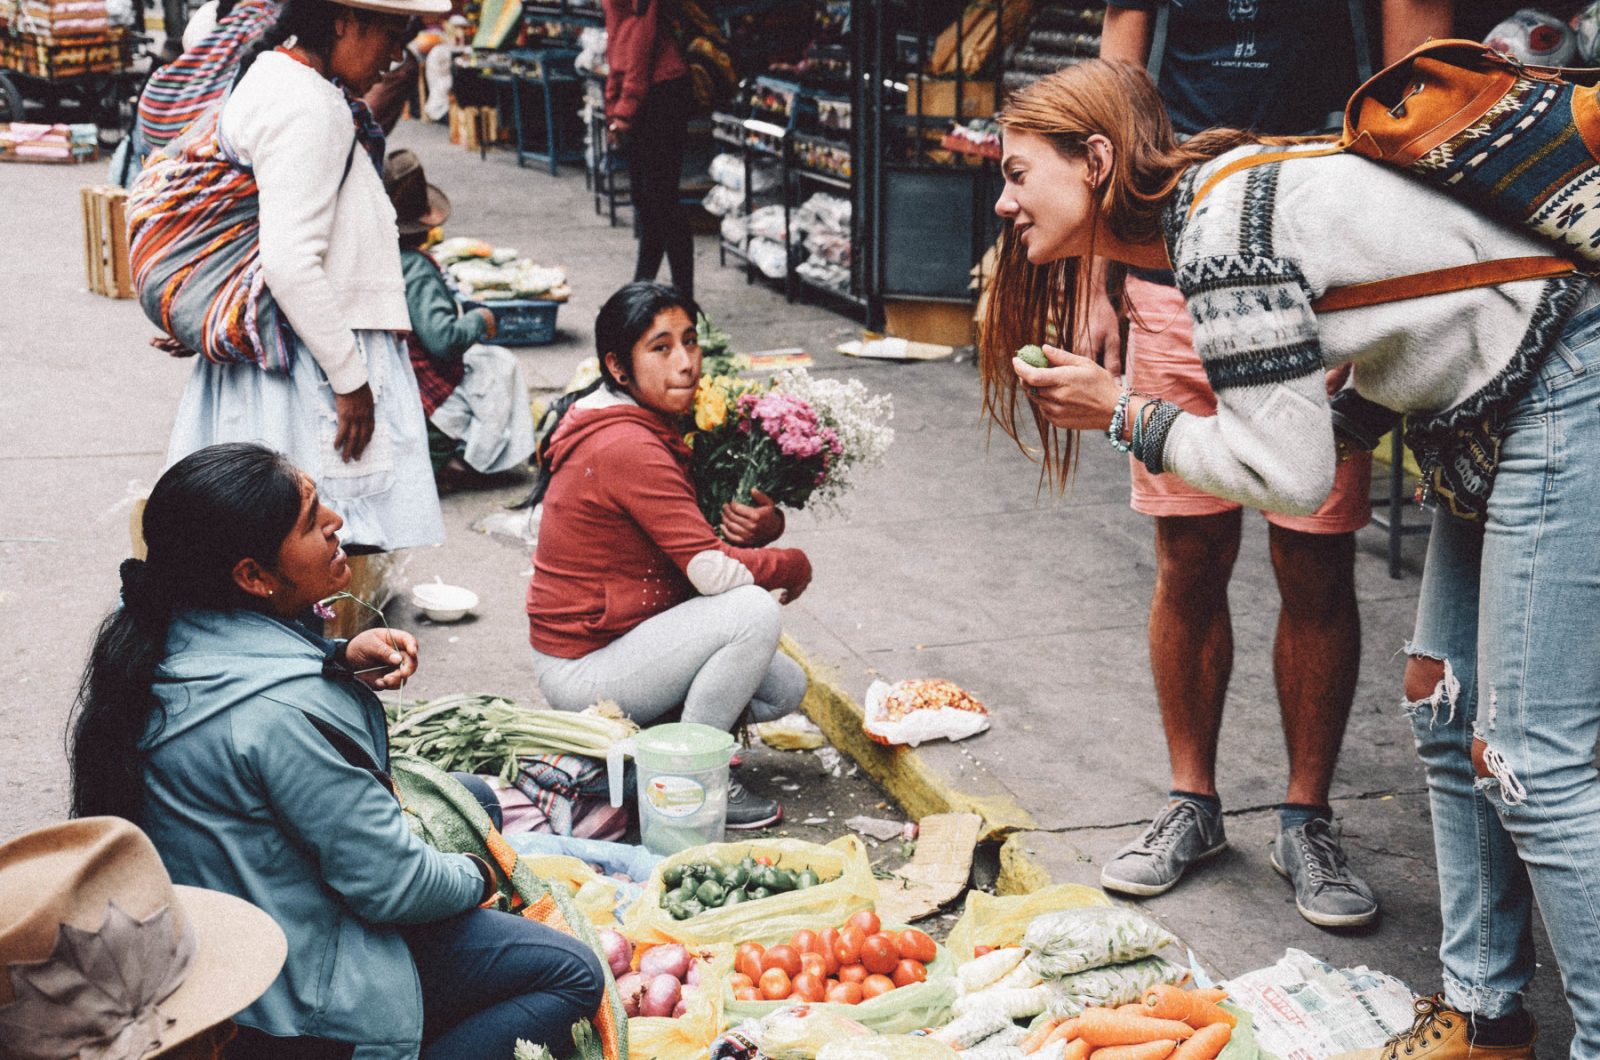 A girl talking to the Peruvian seller at the market